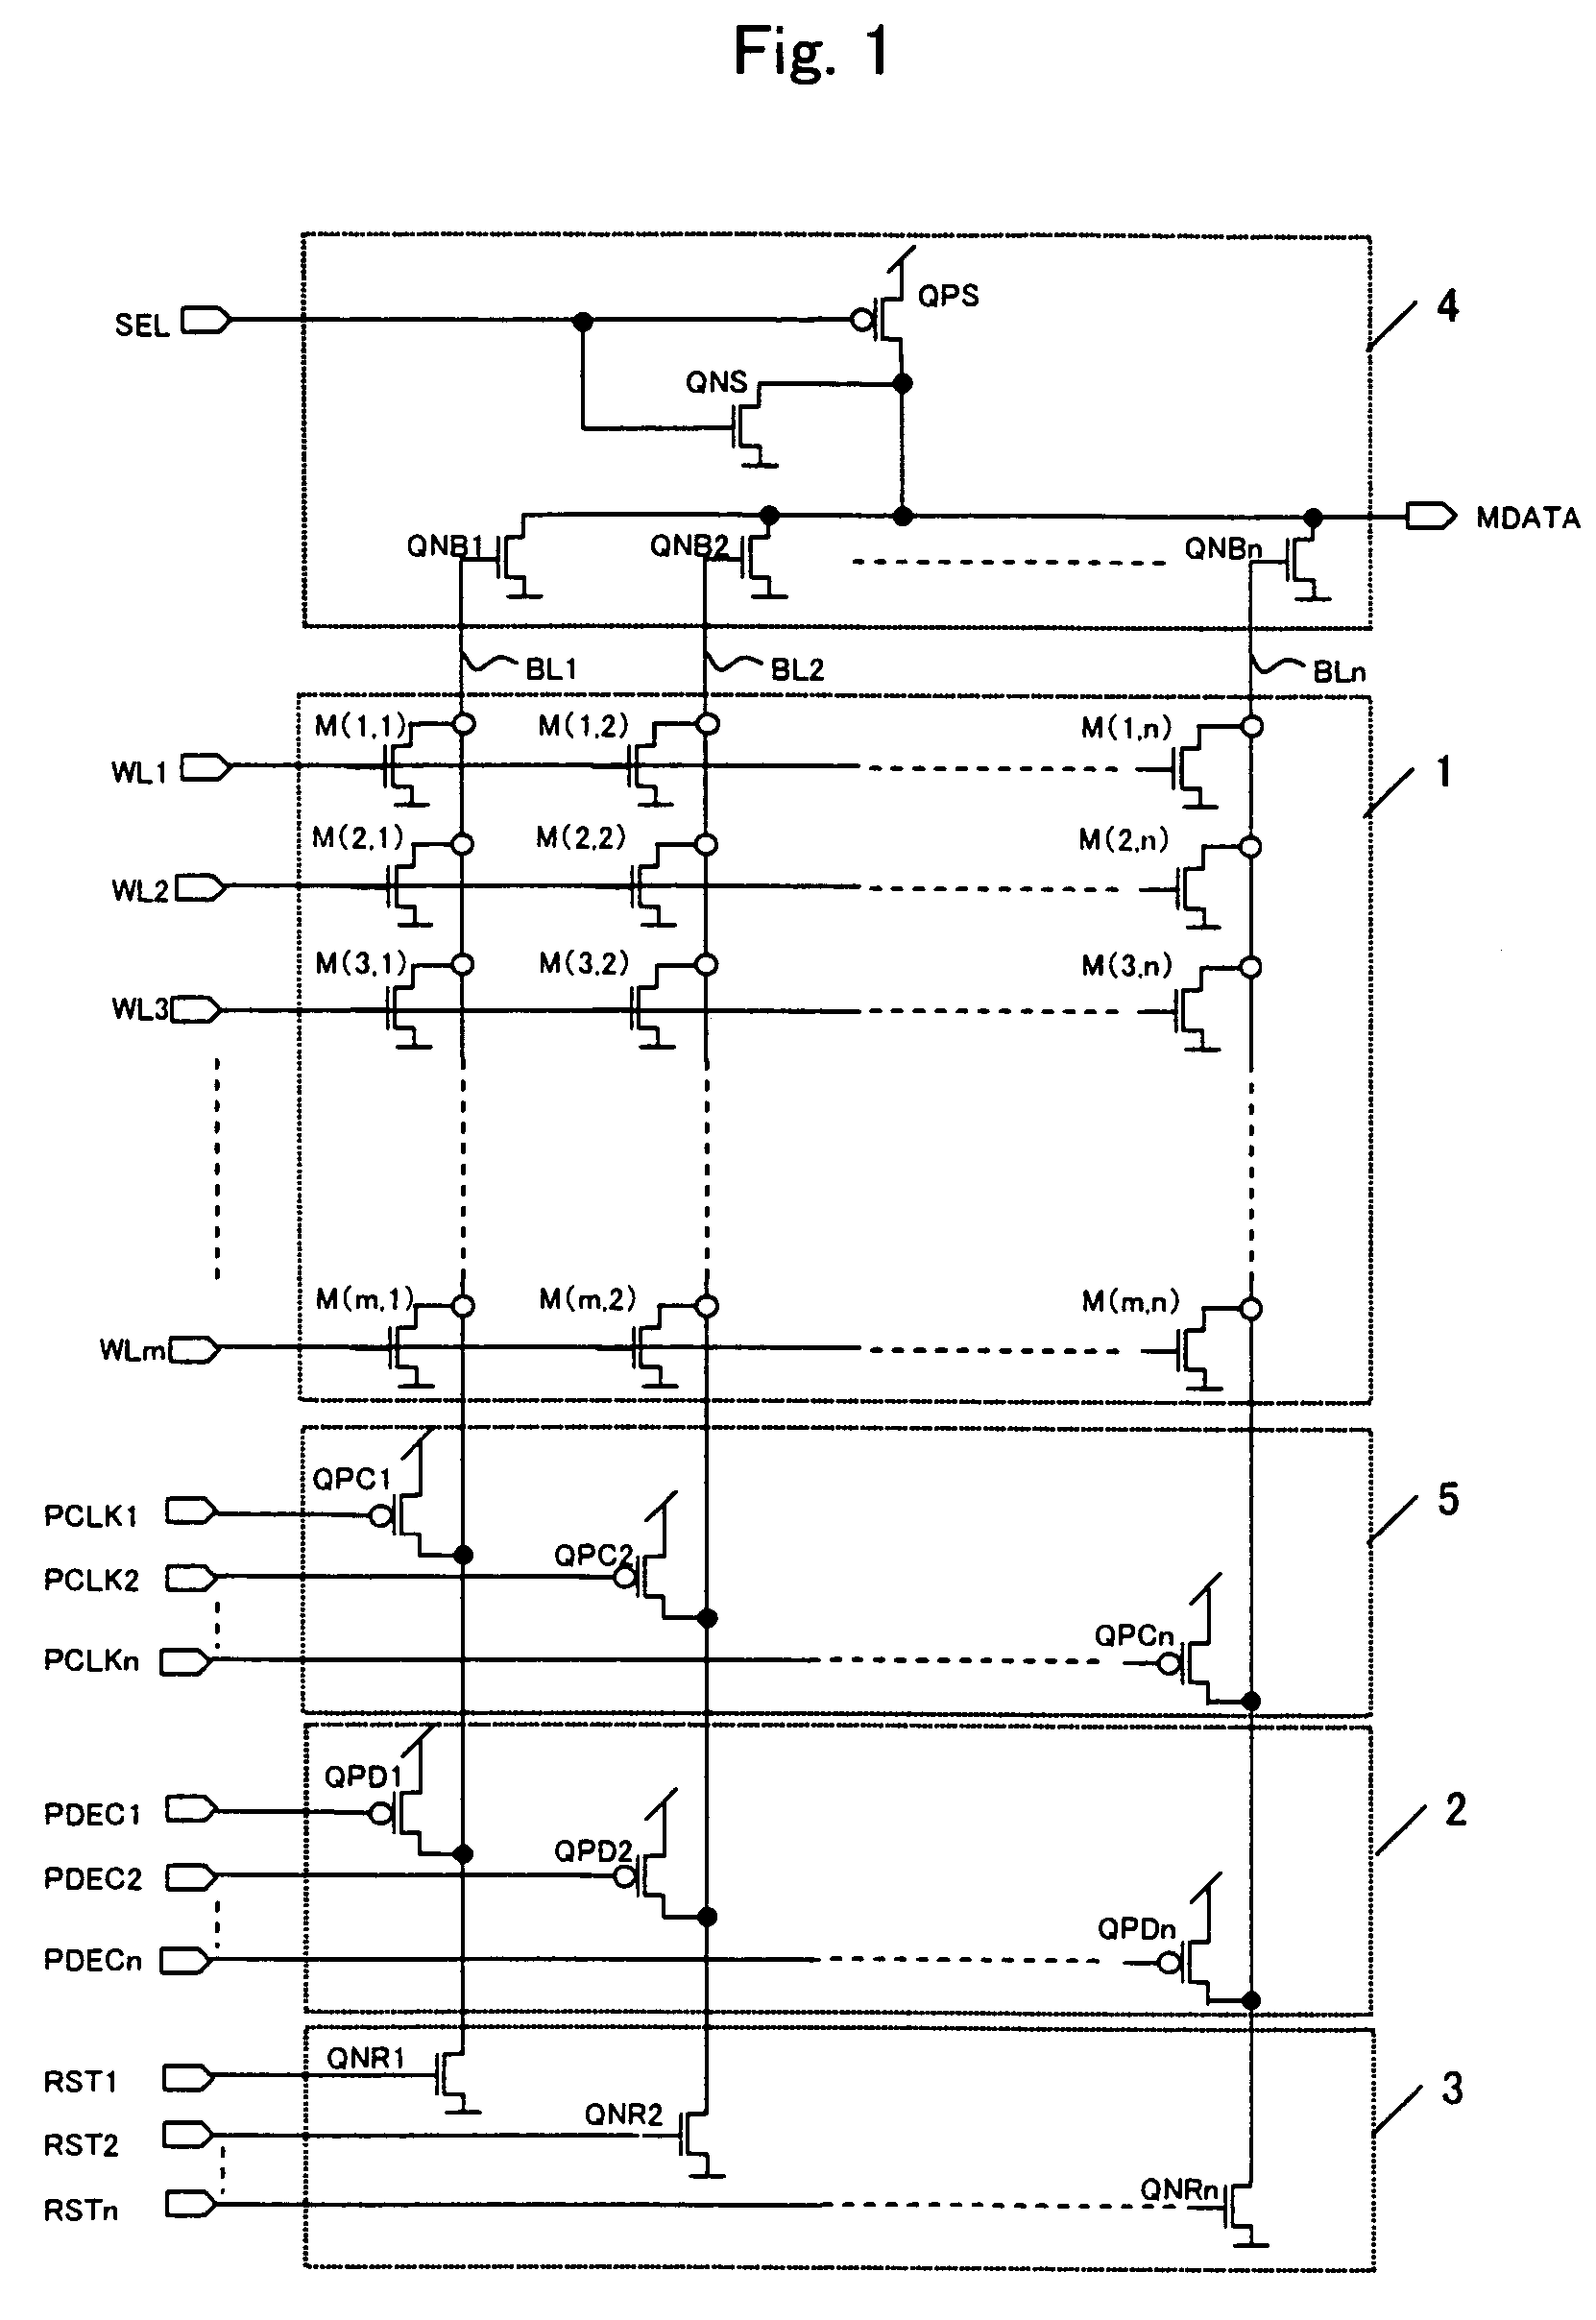 Semiconductor memory device having bit line precharge circuit controlled by address decoded signals